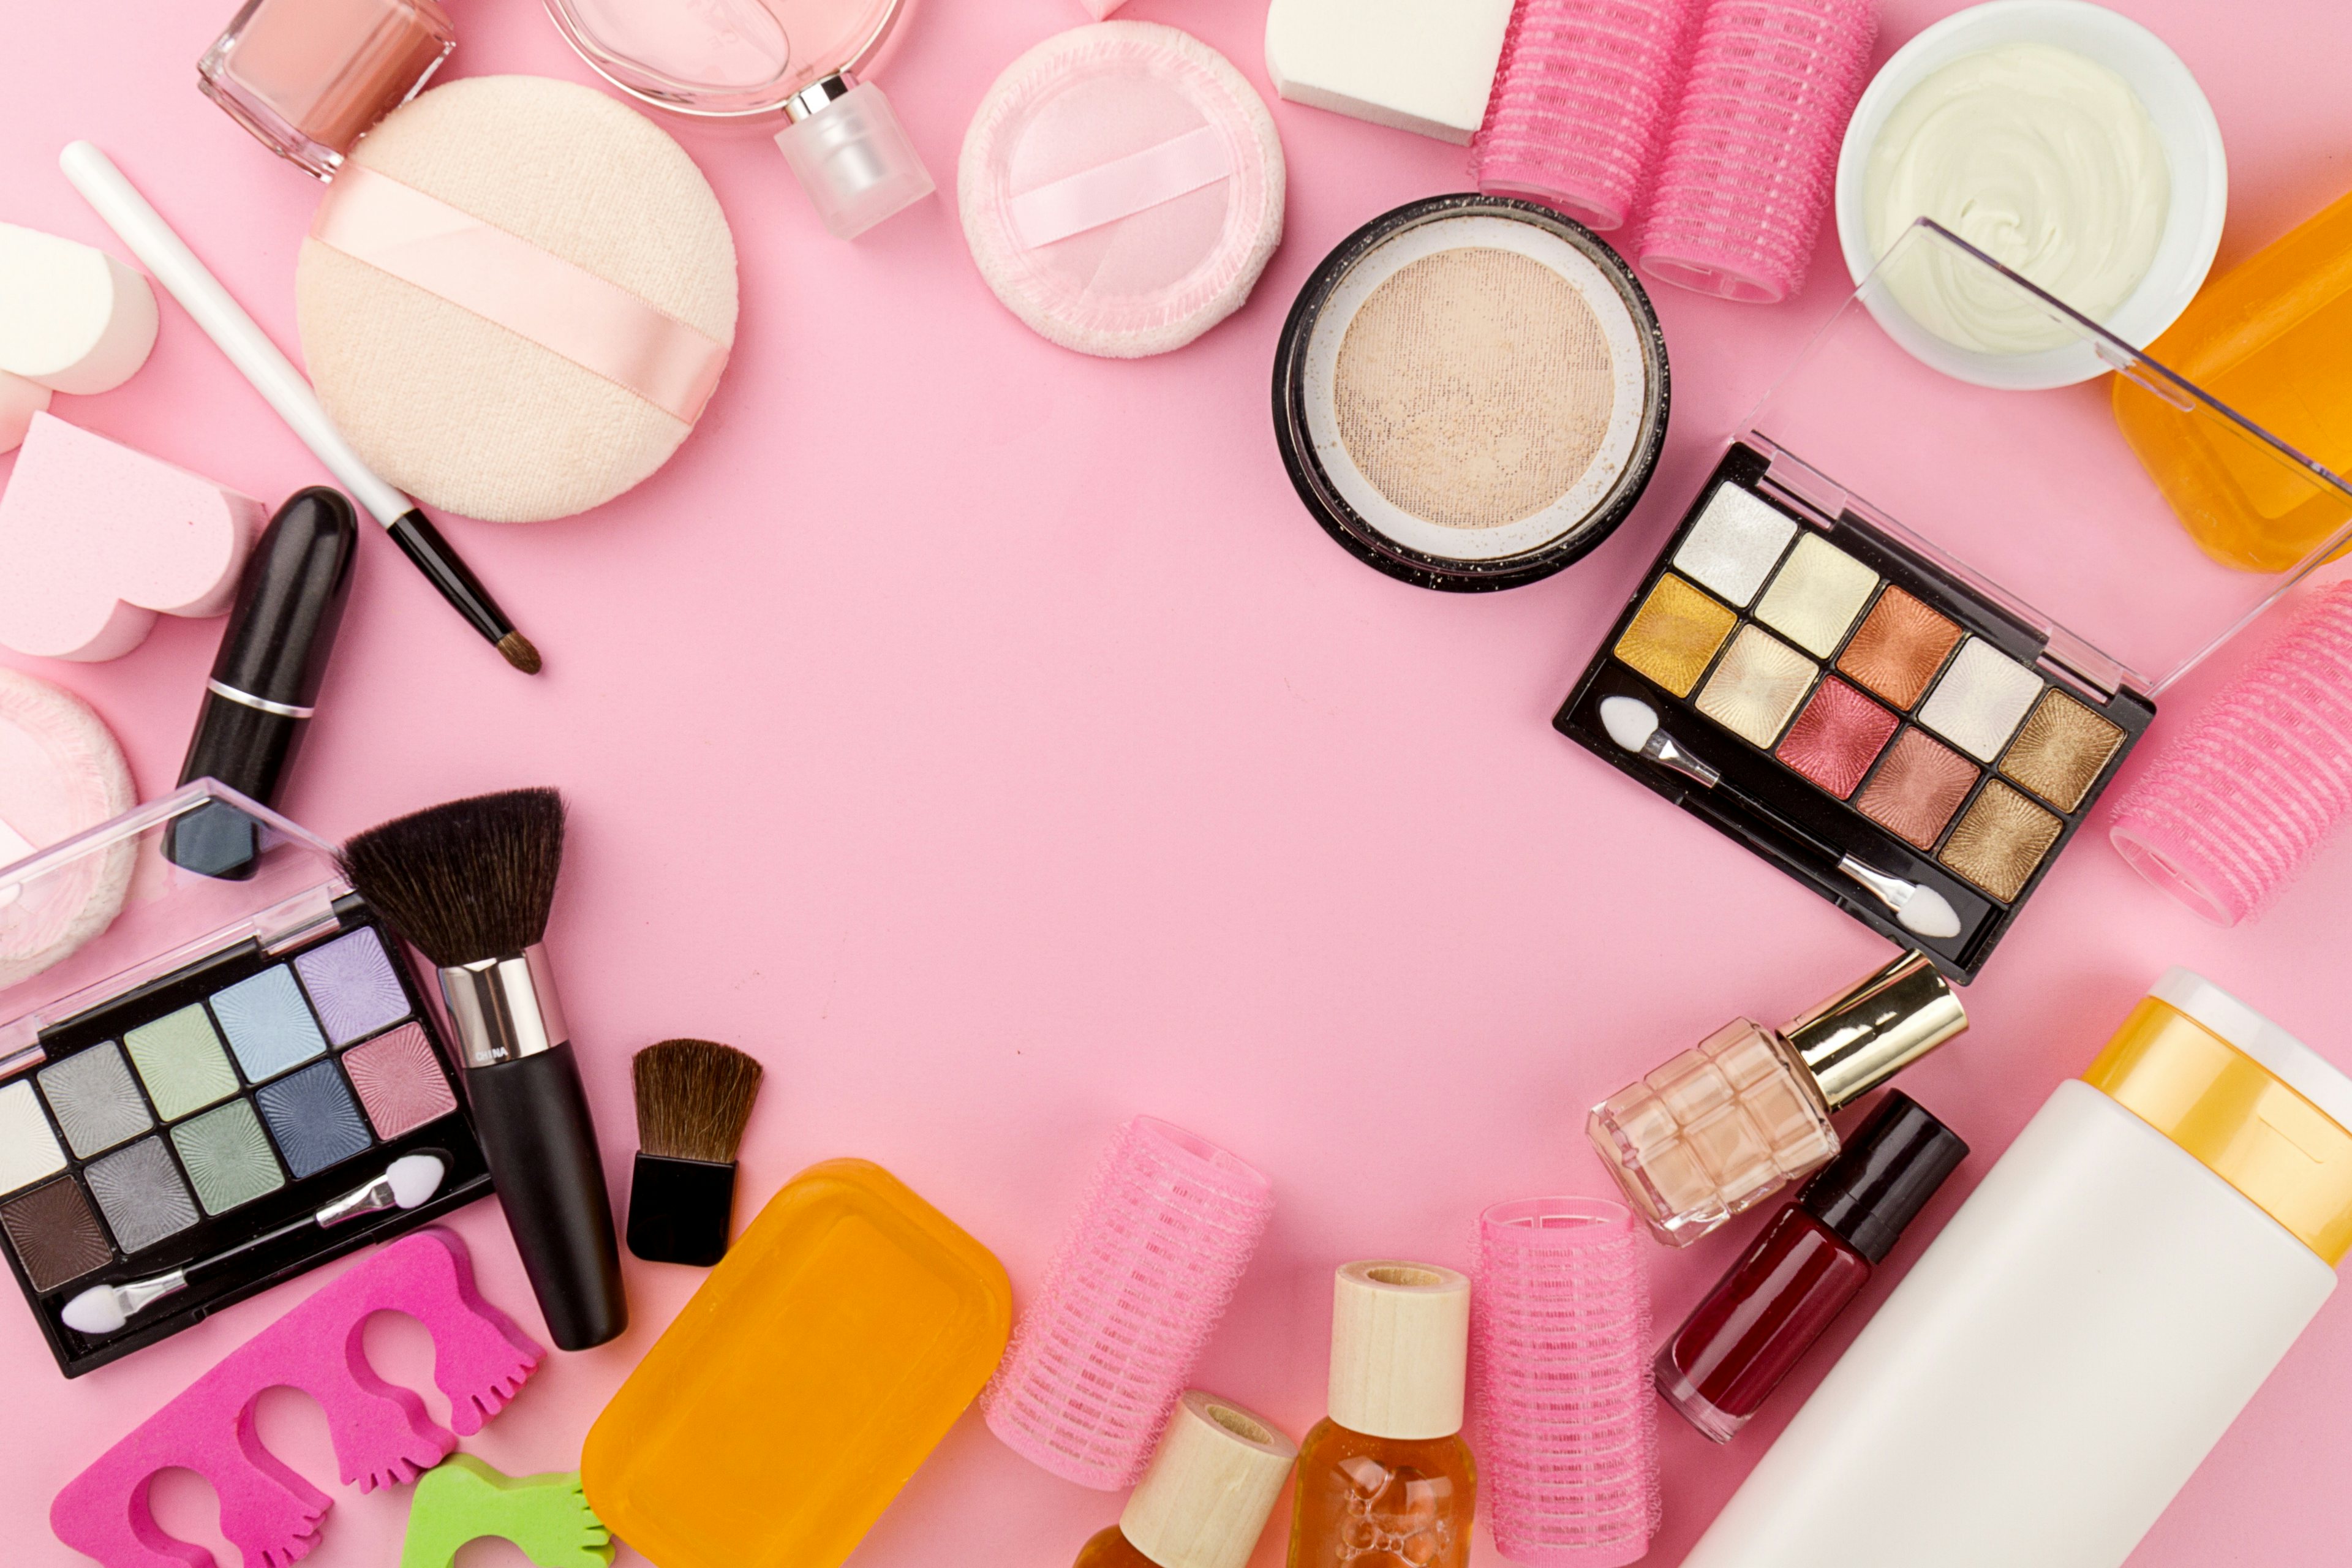 Beauty Spa Feminine Concept. Different Makeup Beauty Care Essentials Cosmetics on Flat Lay Pink Background. Top View. Above. Photo: freepik